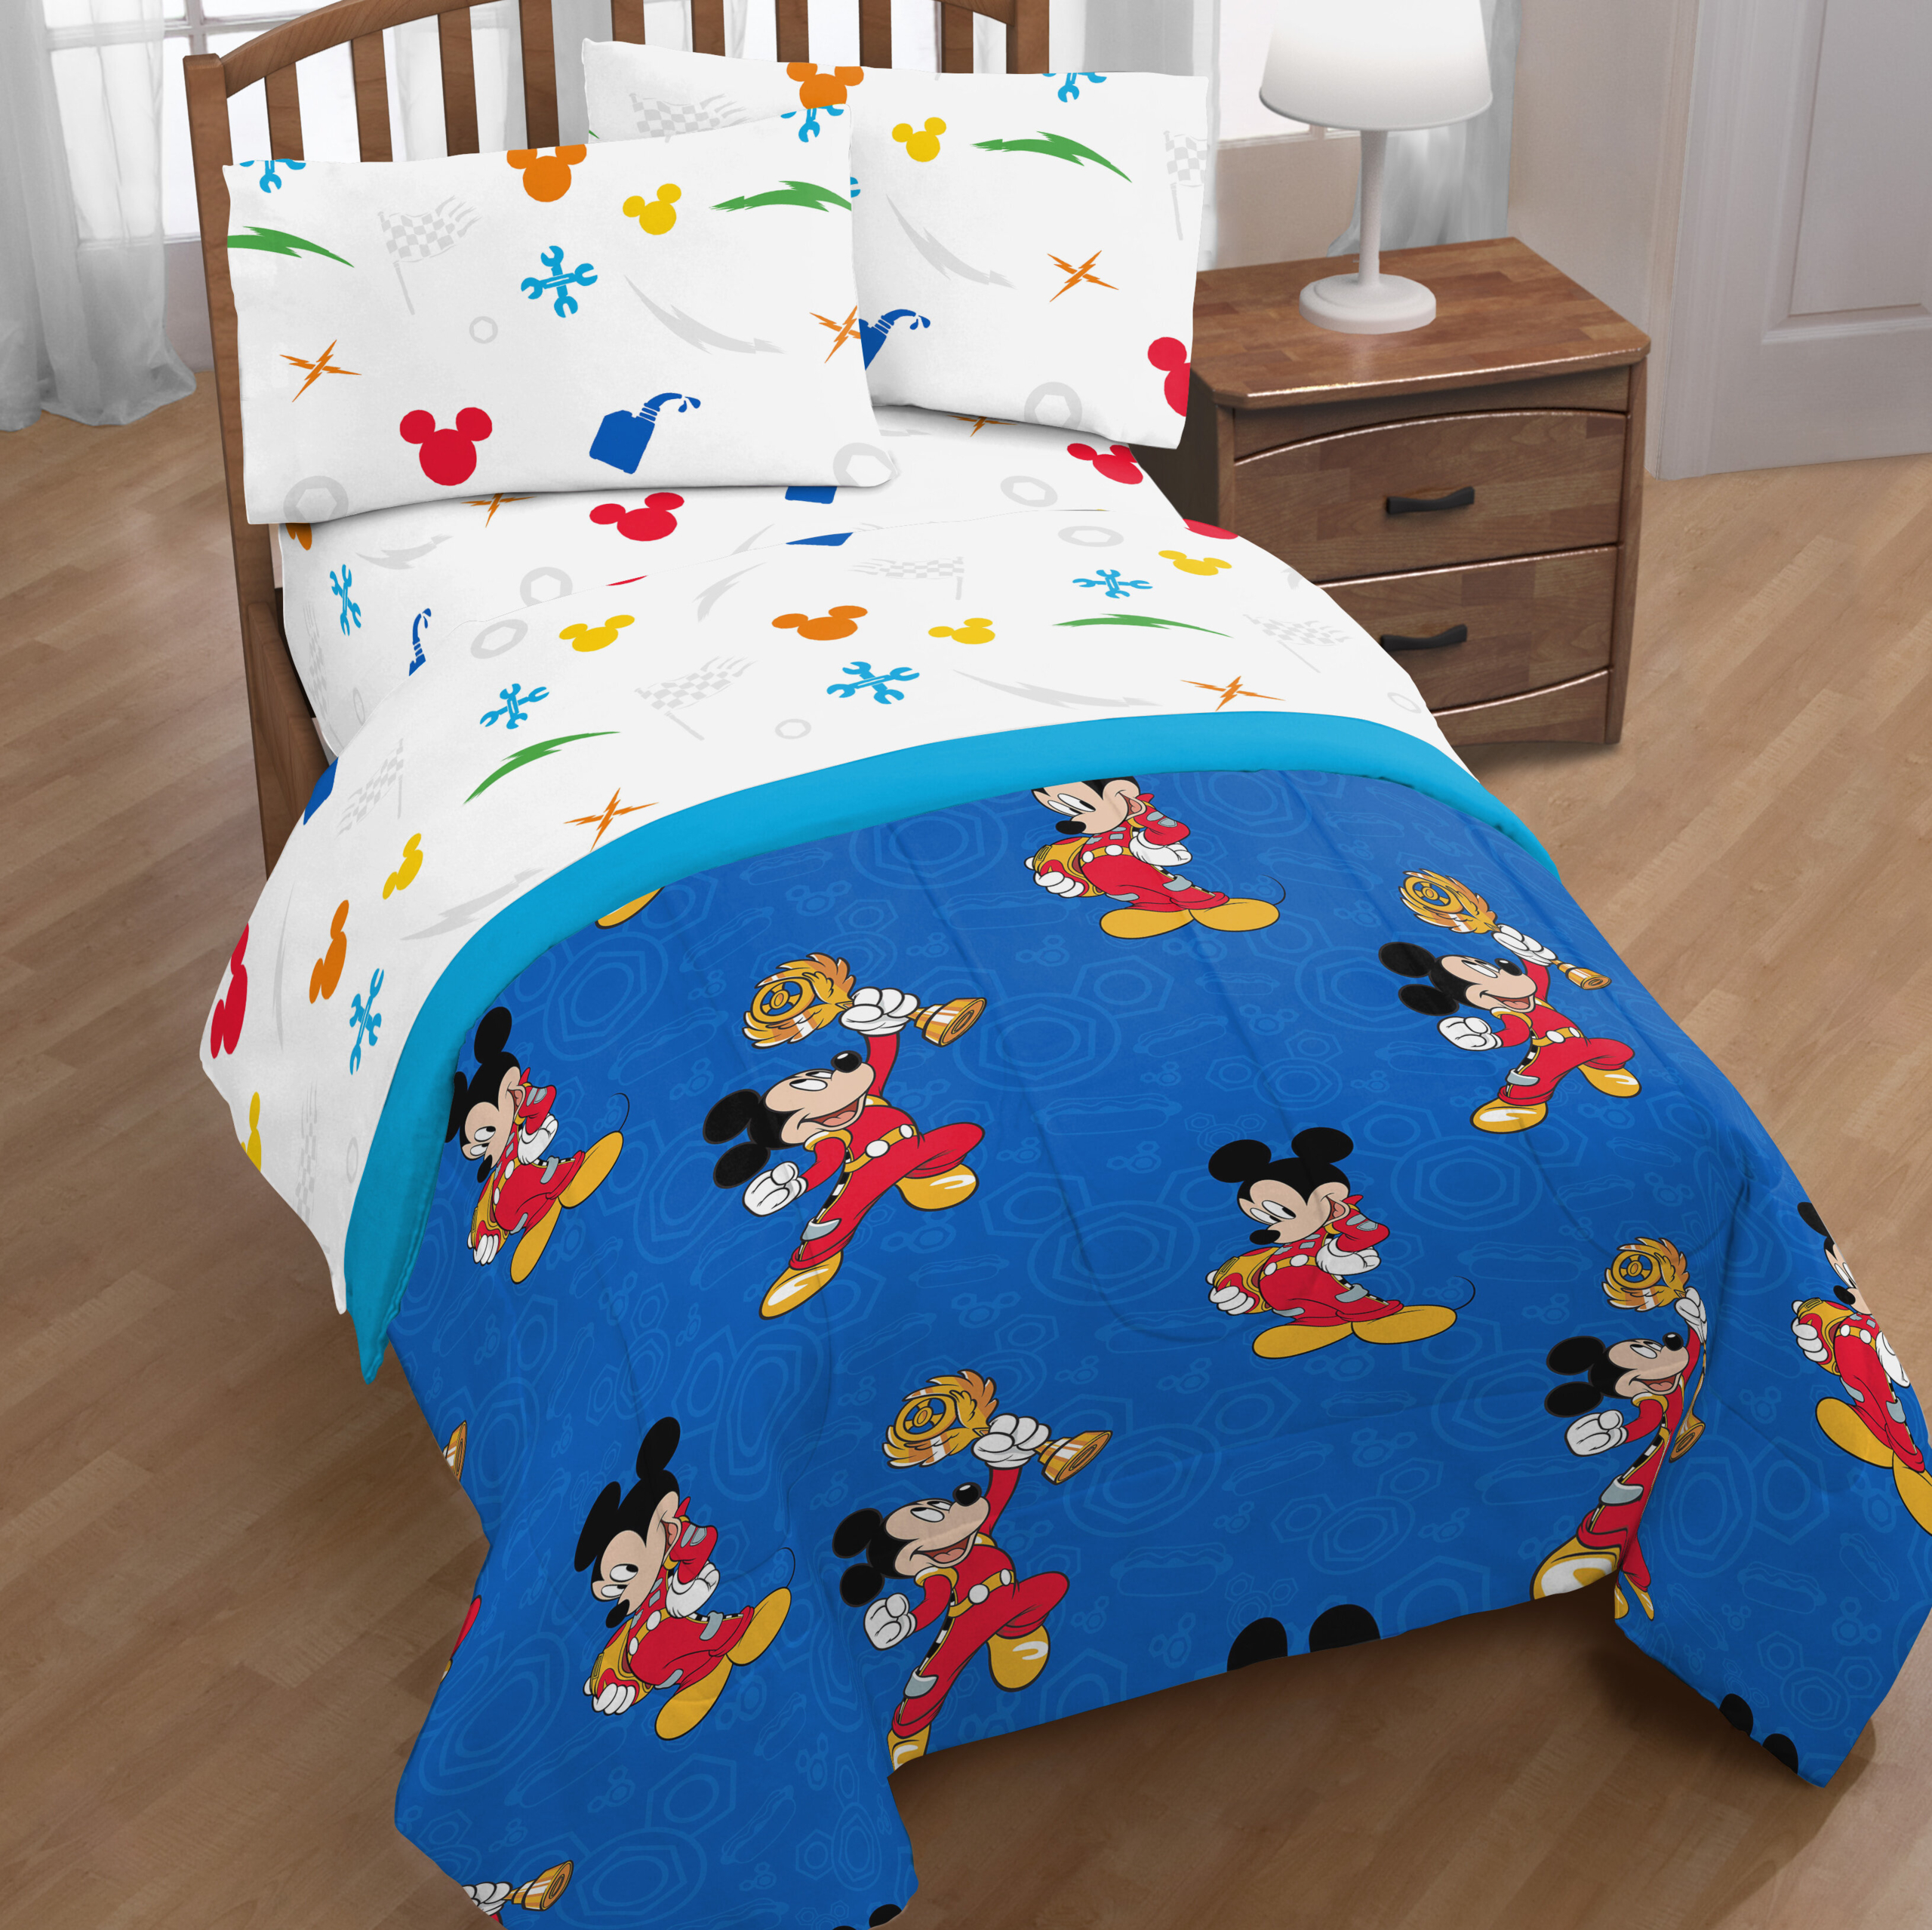 Details about   Boys Disney Mickey Mouse Stars Blue Reversible Comforter in Cotton Feel Fabric 